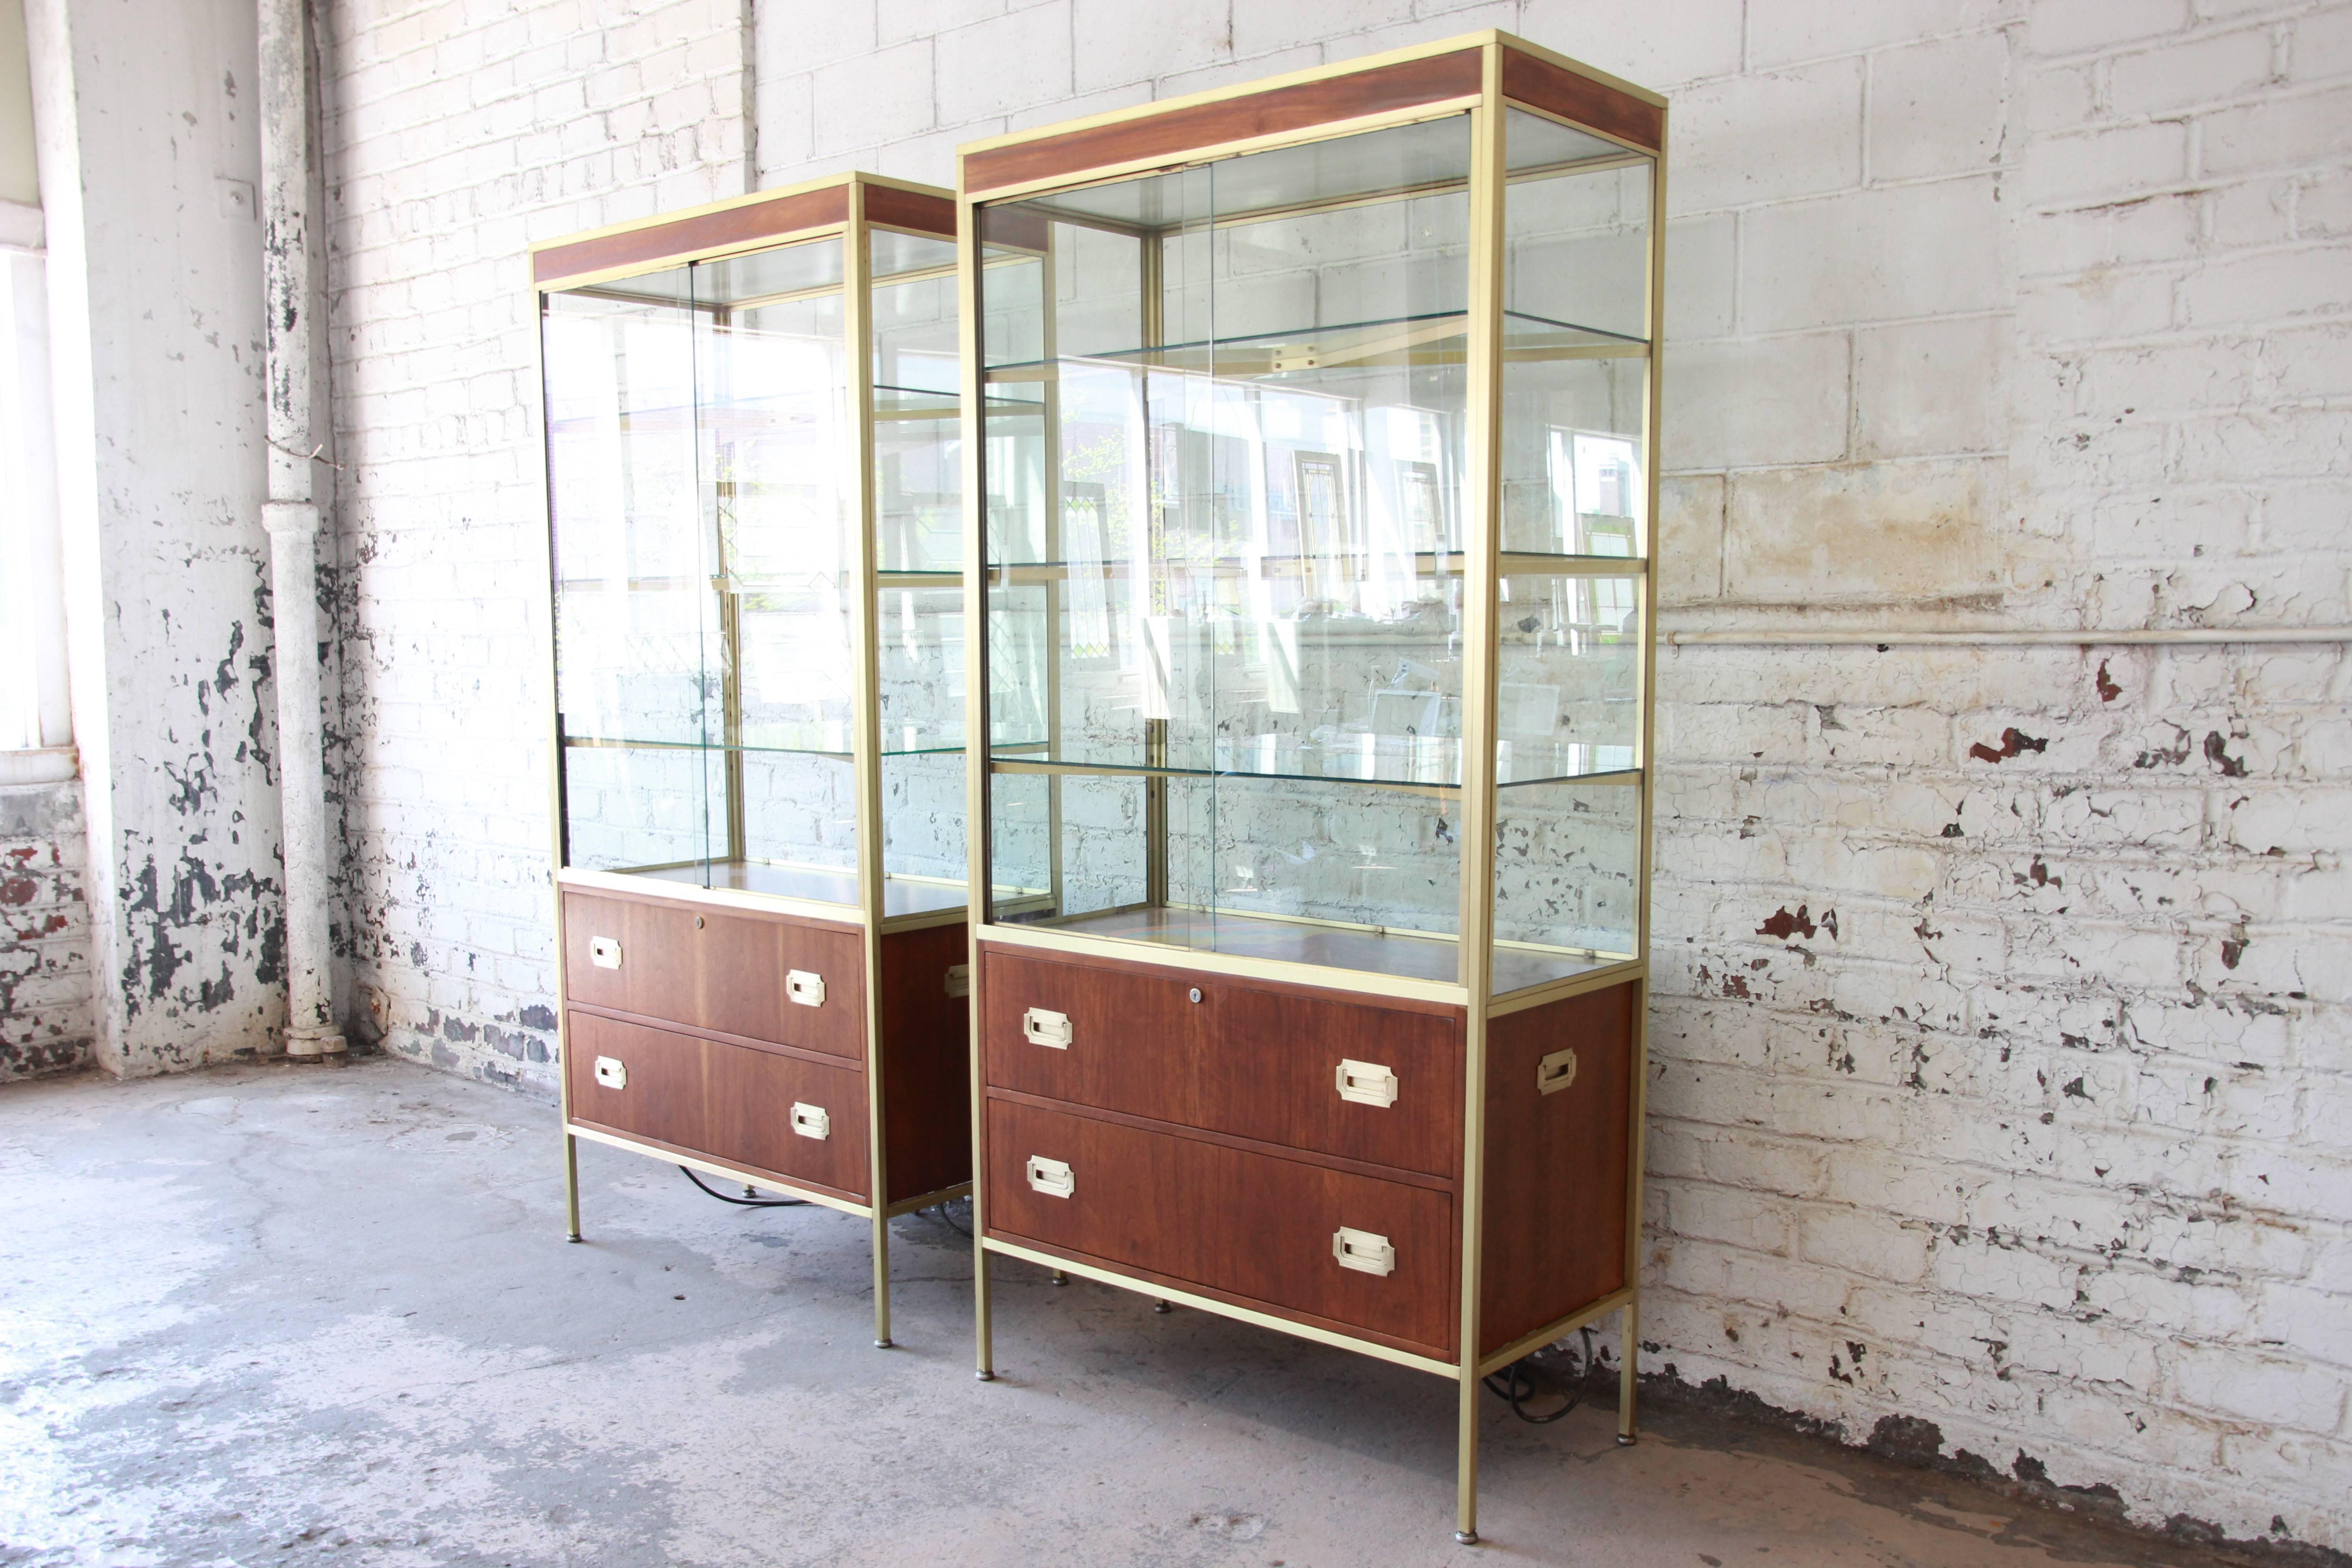 An extremely rare and exceptional pair of midcentury Hollywood Regency Campaign style lighted display cabinets in walnut, brass, and glass by Baker Furniture. The cabinets feature newly polished solid brass frames, with a glass case display and